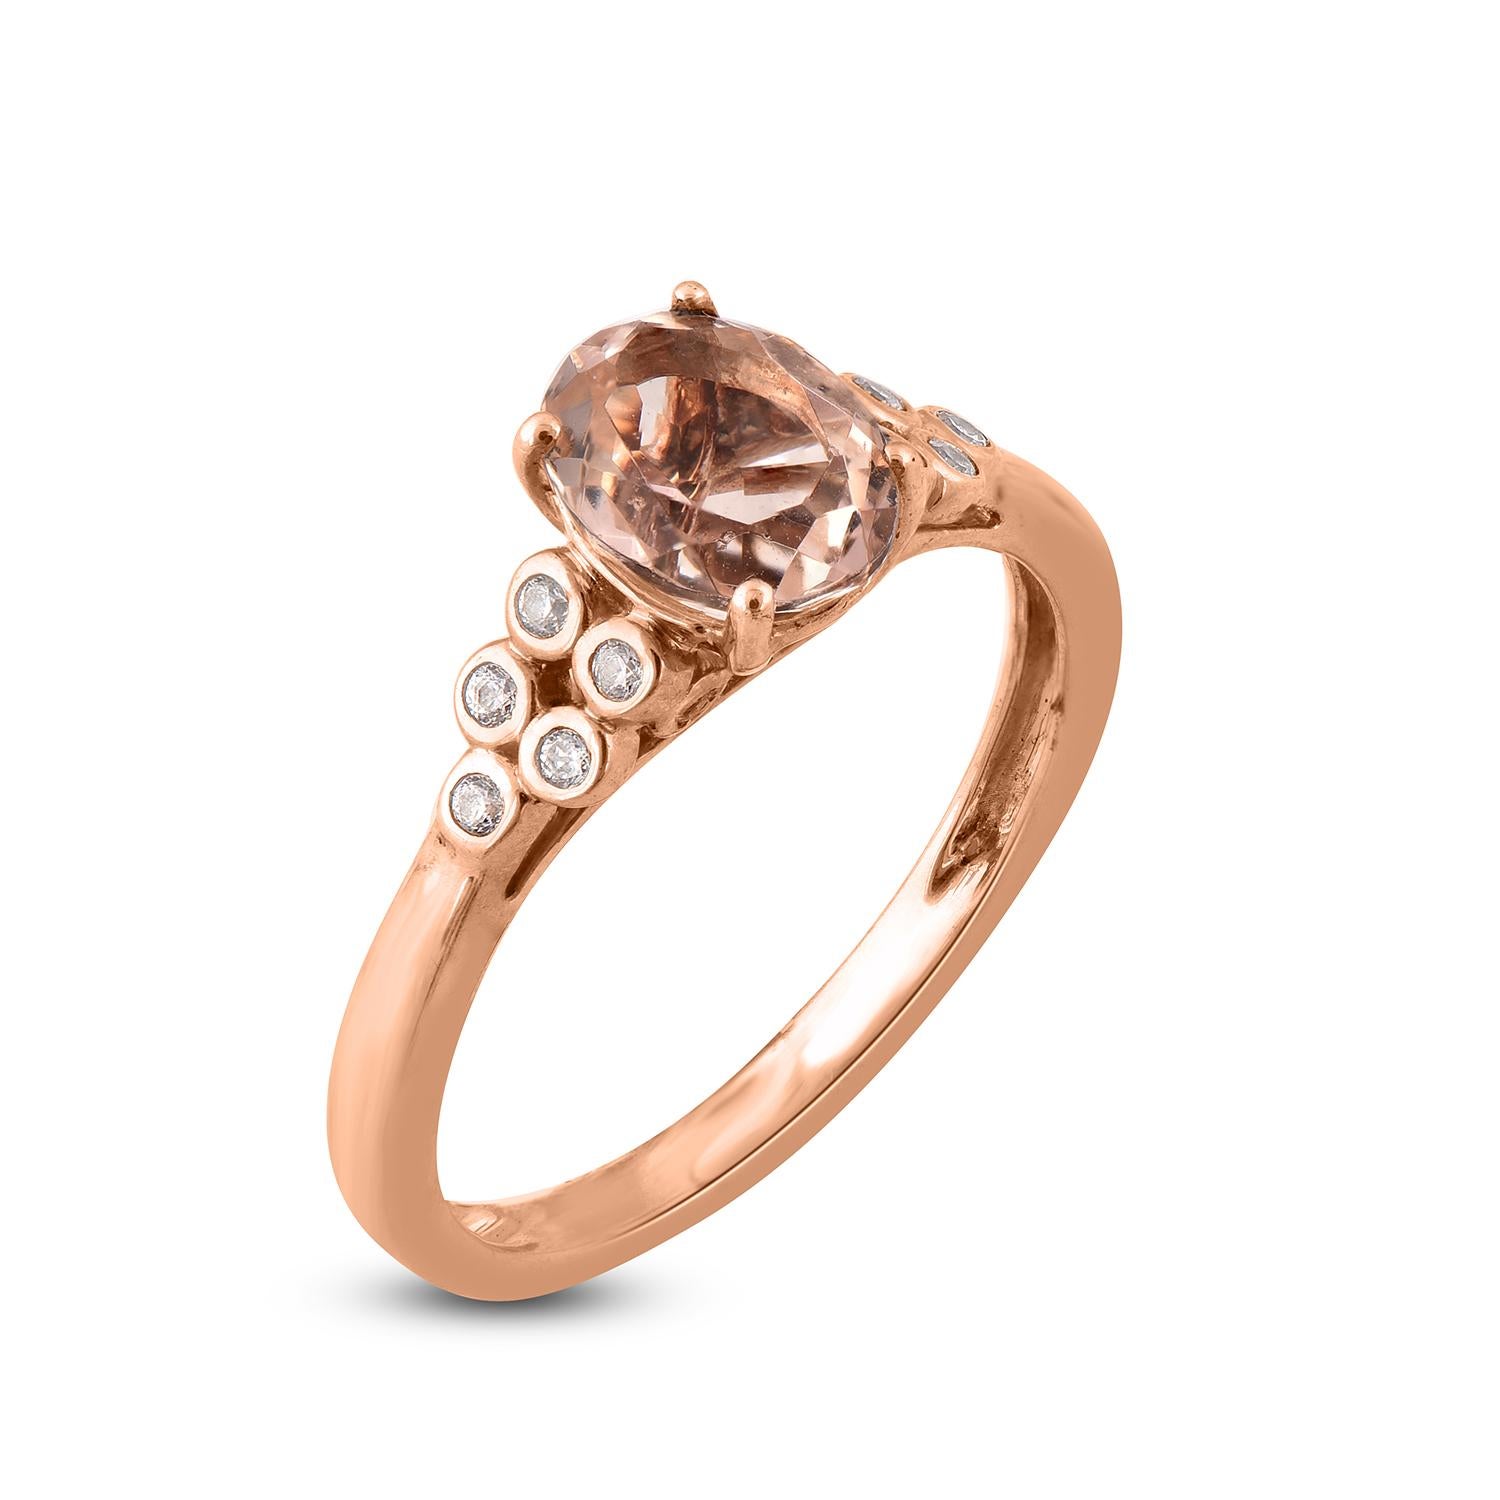 It's only for you... made by our skillful artisans in 14 karat Rose gold and studded with 14 diamond lined on shank 1 center Oval shape morganite set in prong and bezel setting. these diamond engagement ring will make a lasting impression. Diamonds